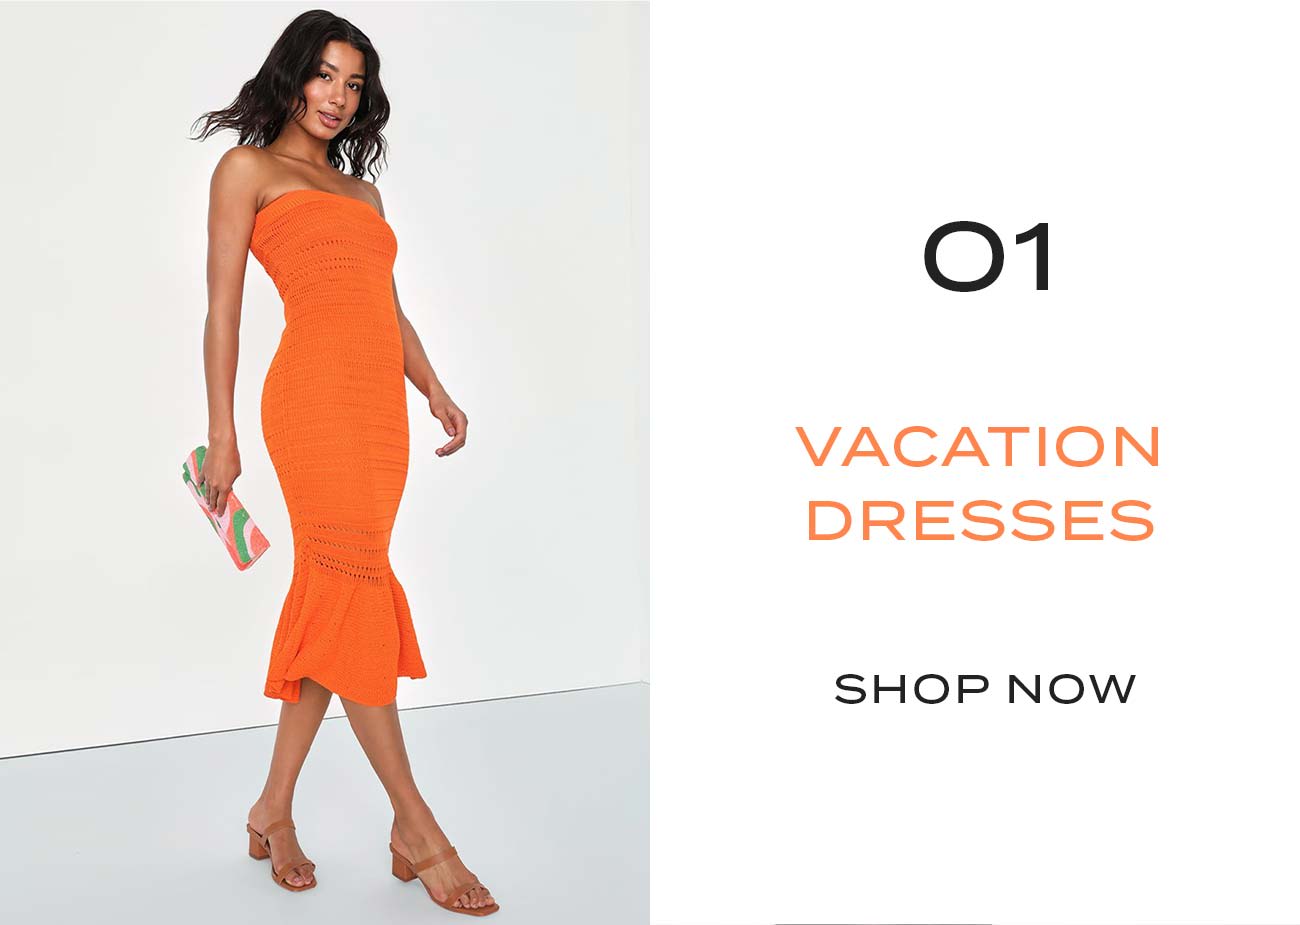  O1 VACATION DRESSES SHOP NOW 